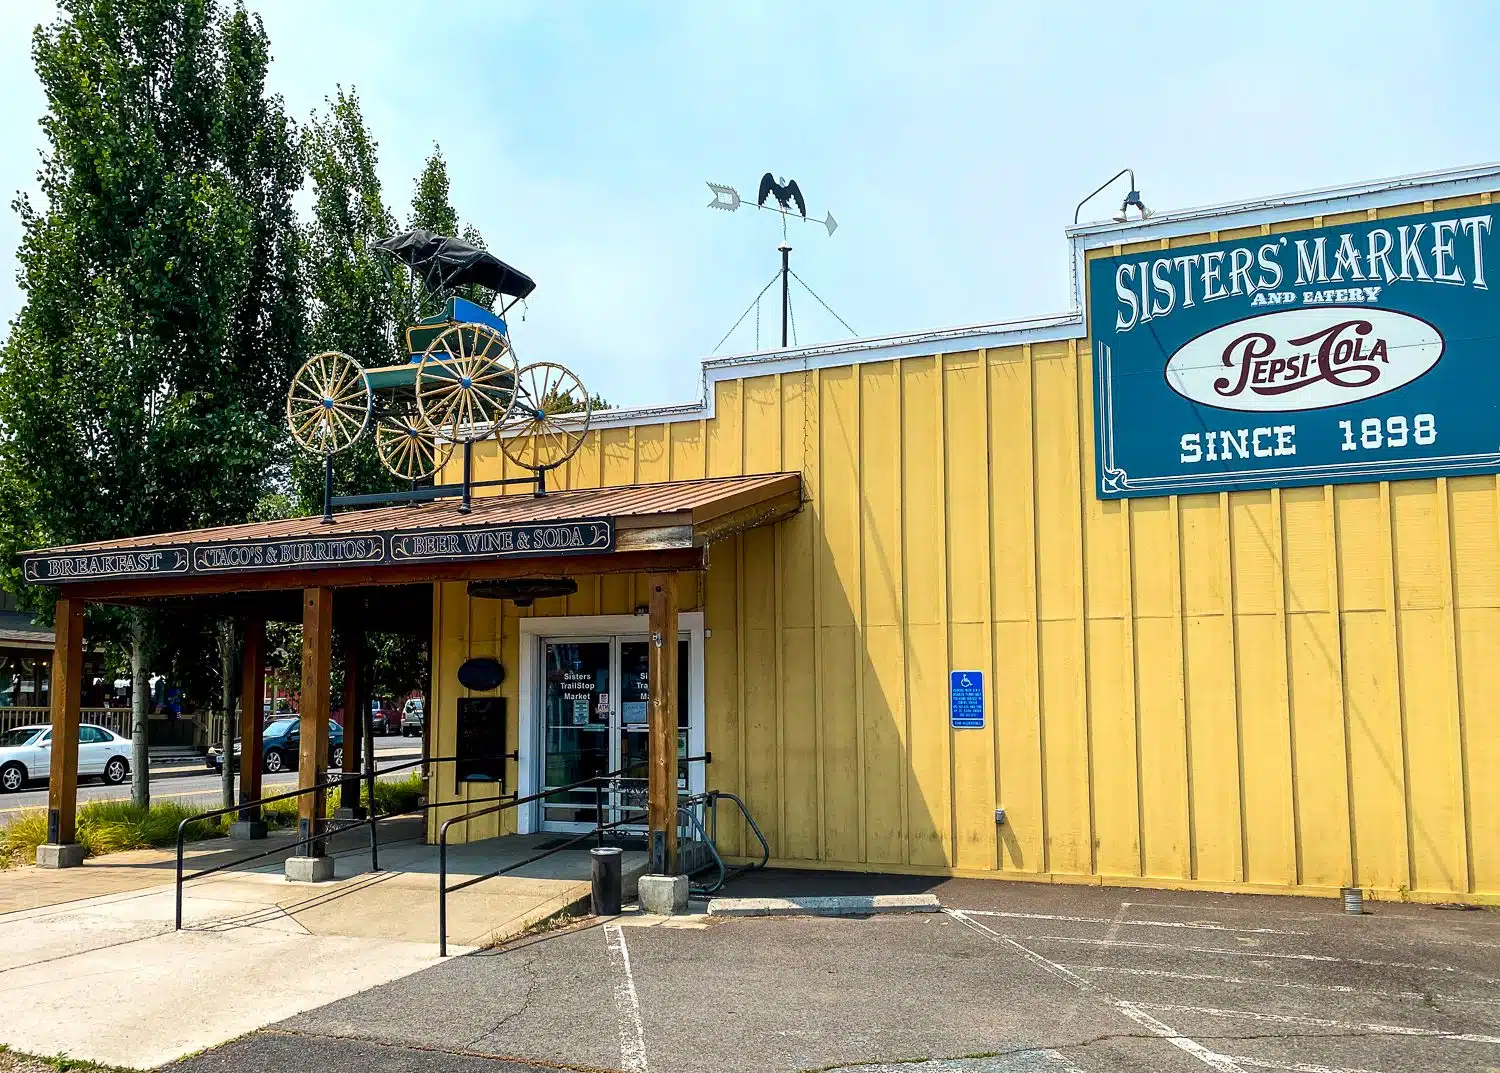 Old-fashioned Sisters Market, Oregon: Since 1898.